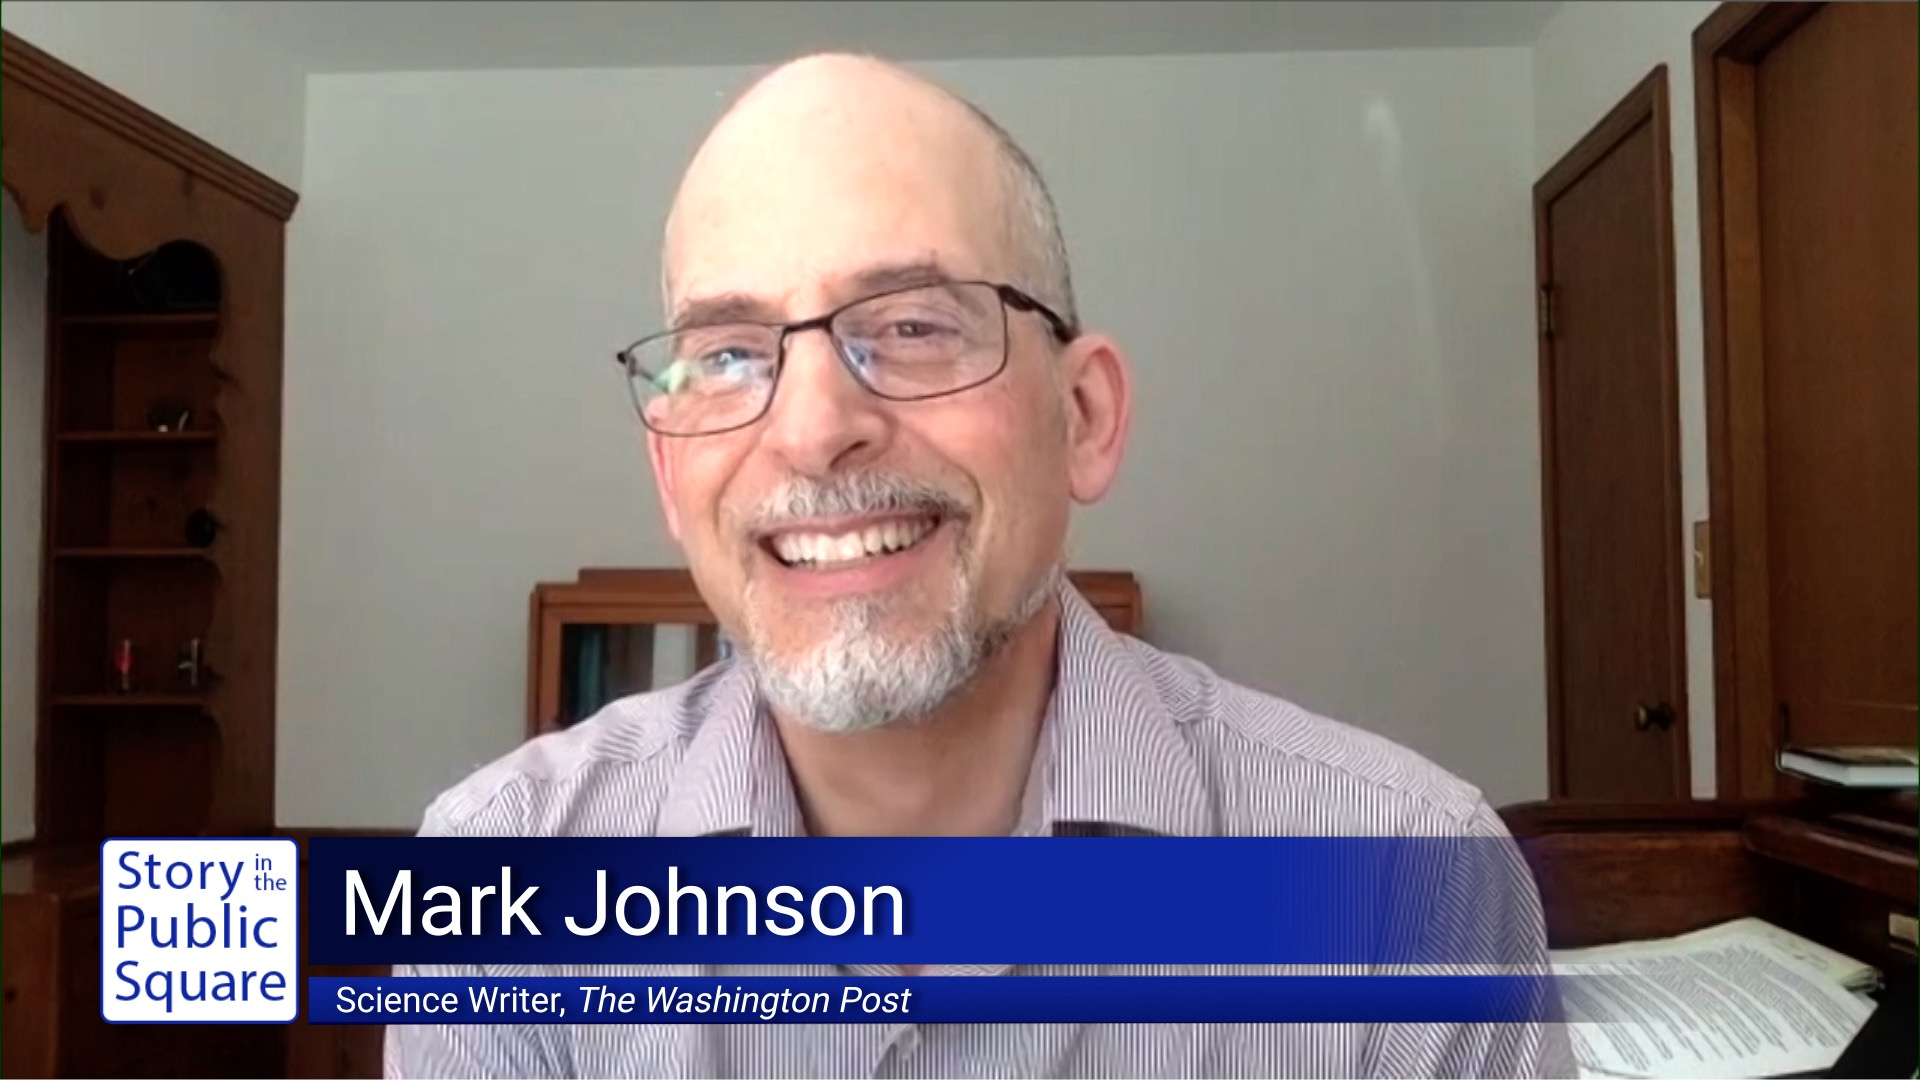 Mark Johnson on Building Empathy in his Science Reporting